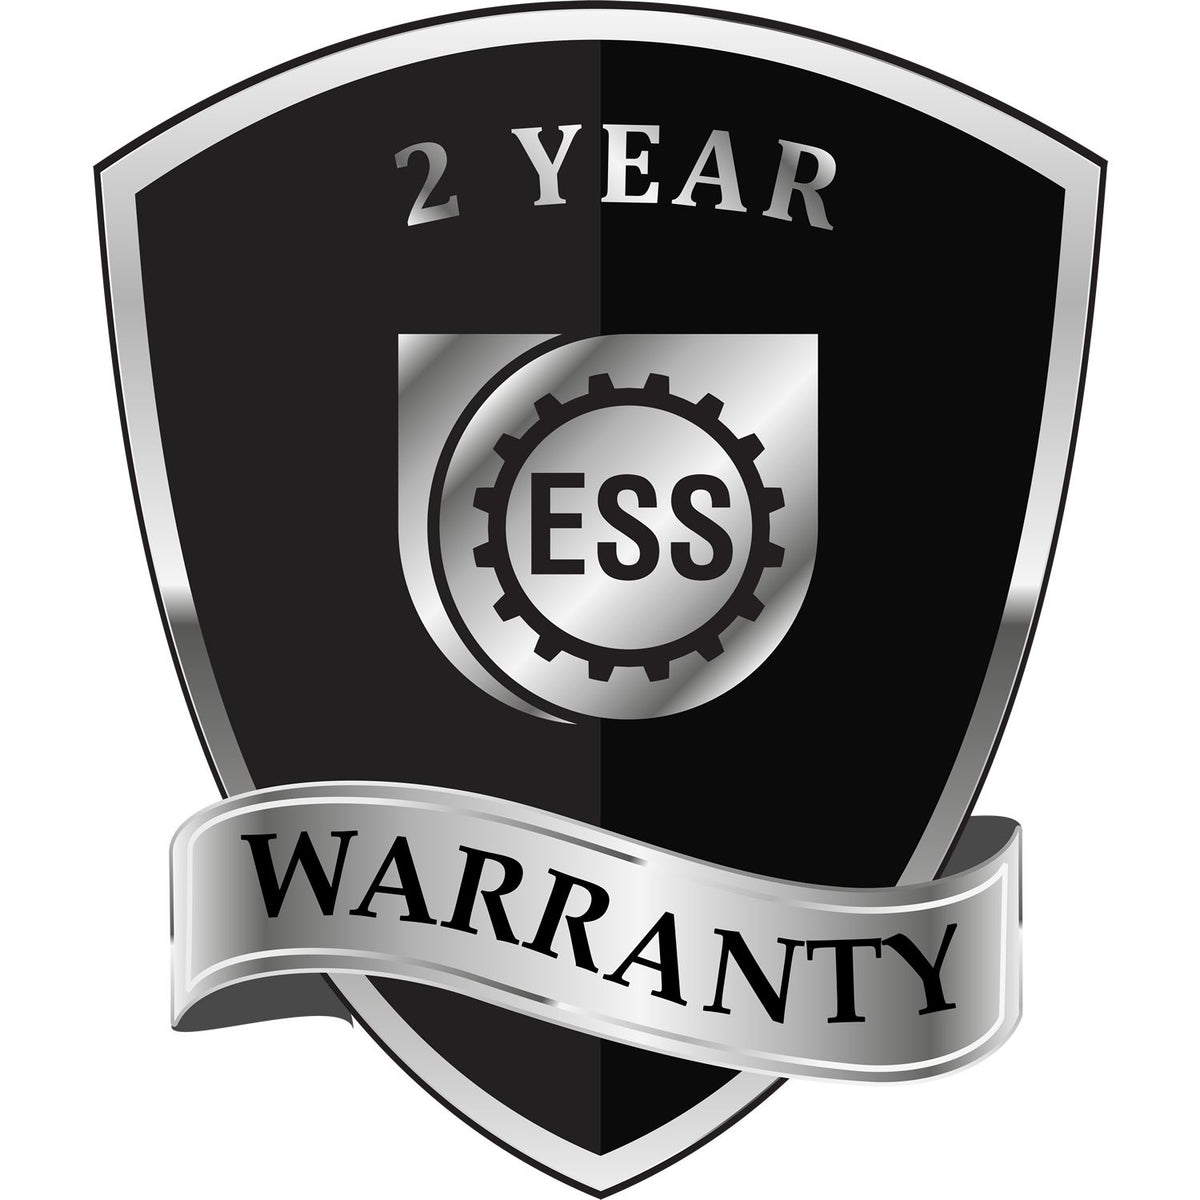 A black and silver badge or emblem showing warranty information for the Hybrid Louisiana Architect Seal